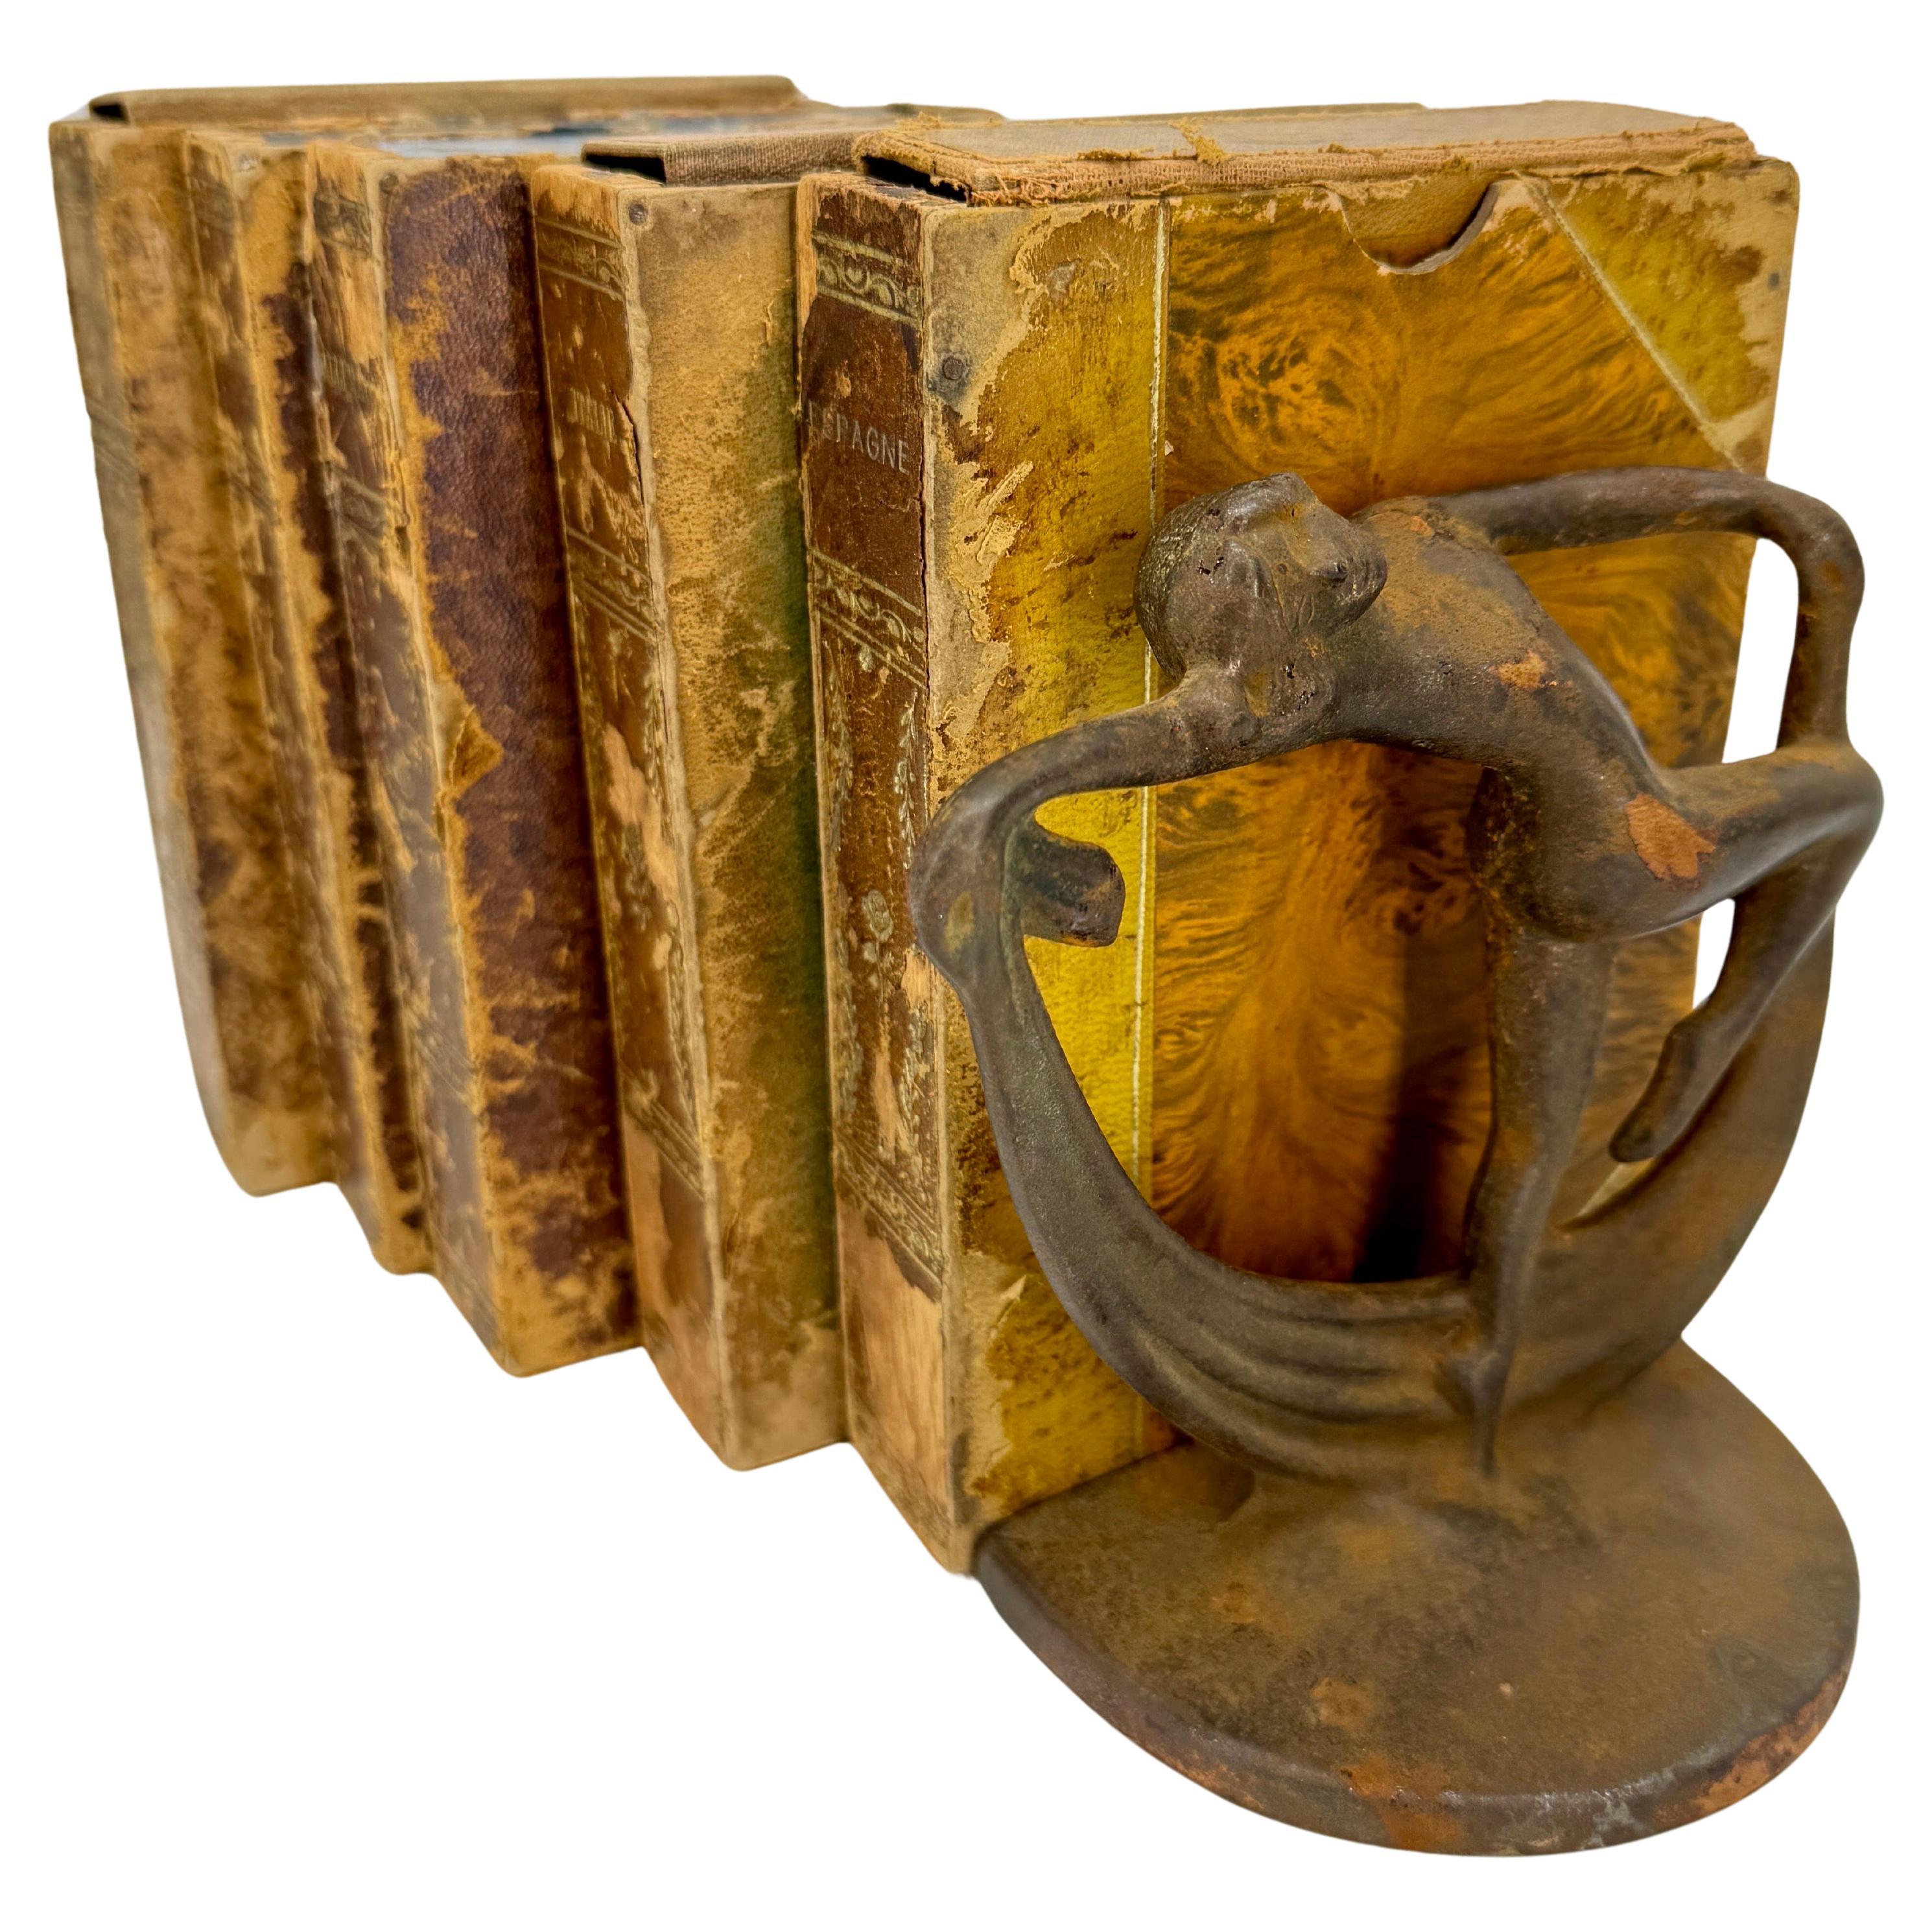 Woman Dancing Art Deco Sculpture Bookend, France

This charming solid cast metal bookend with that Art Deco flair displays stunningly from all angles. Certainly makes a gorgeous statement in an open bookcase with antique books. Great to use on a